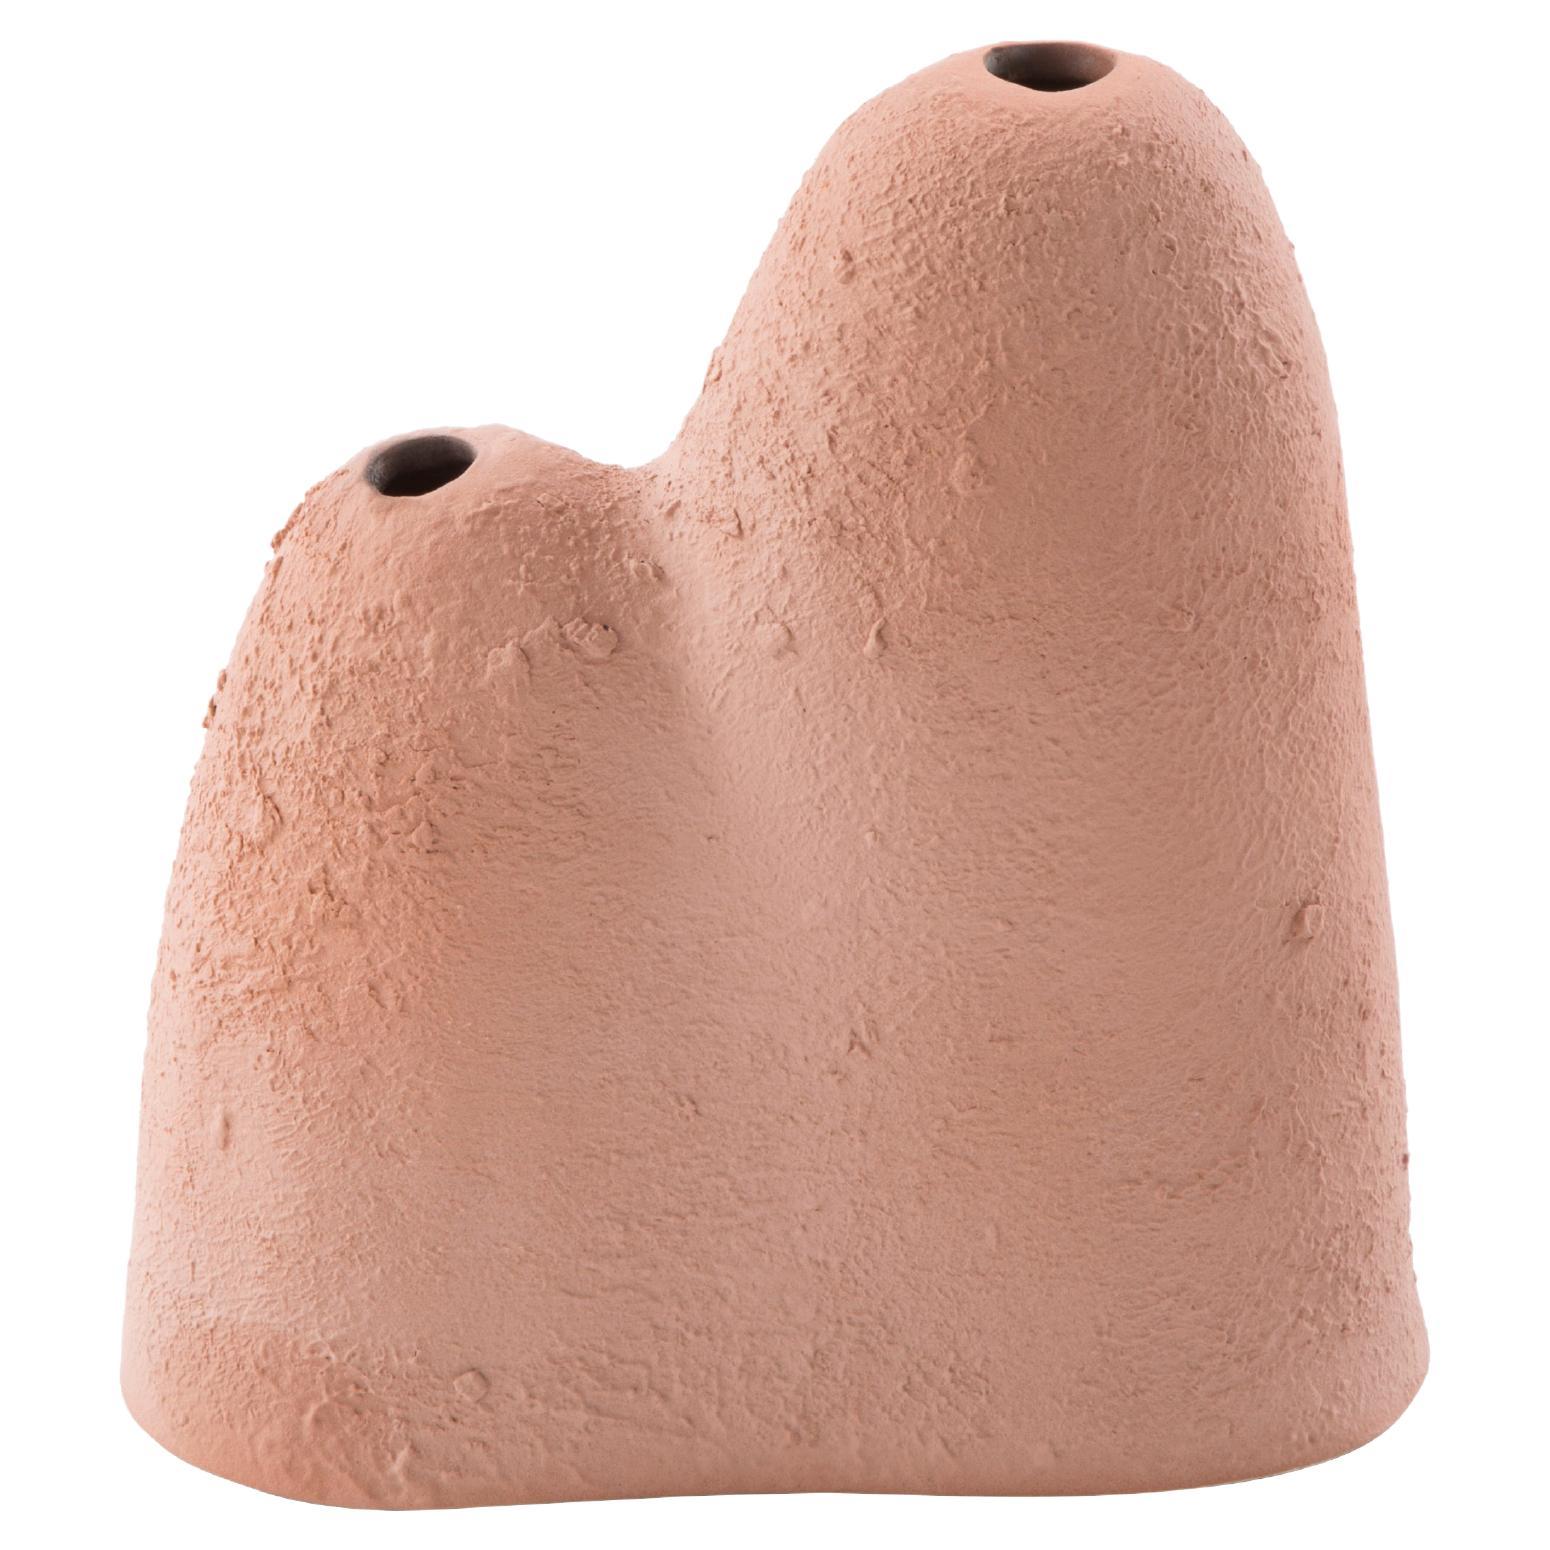 Mountain Small Terracotta Vase by Pulpo For Sale